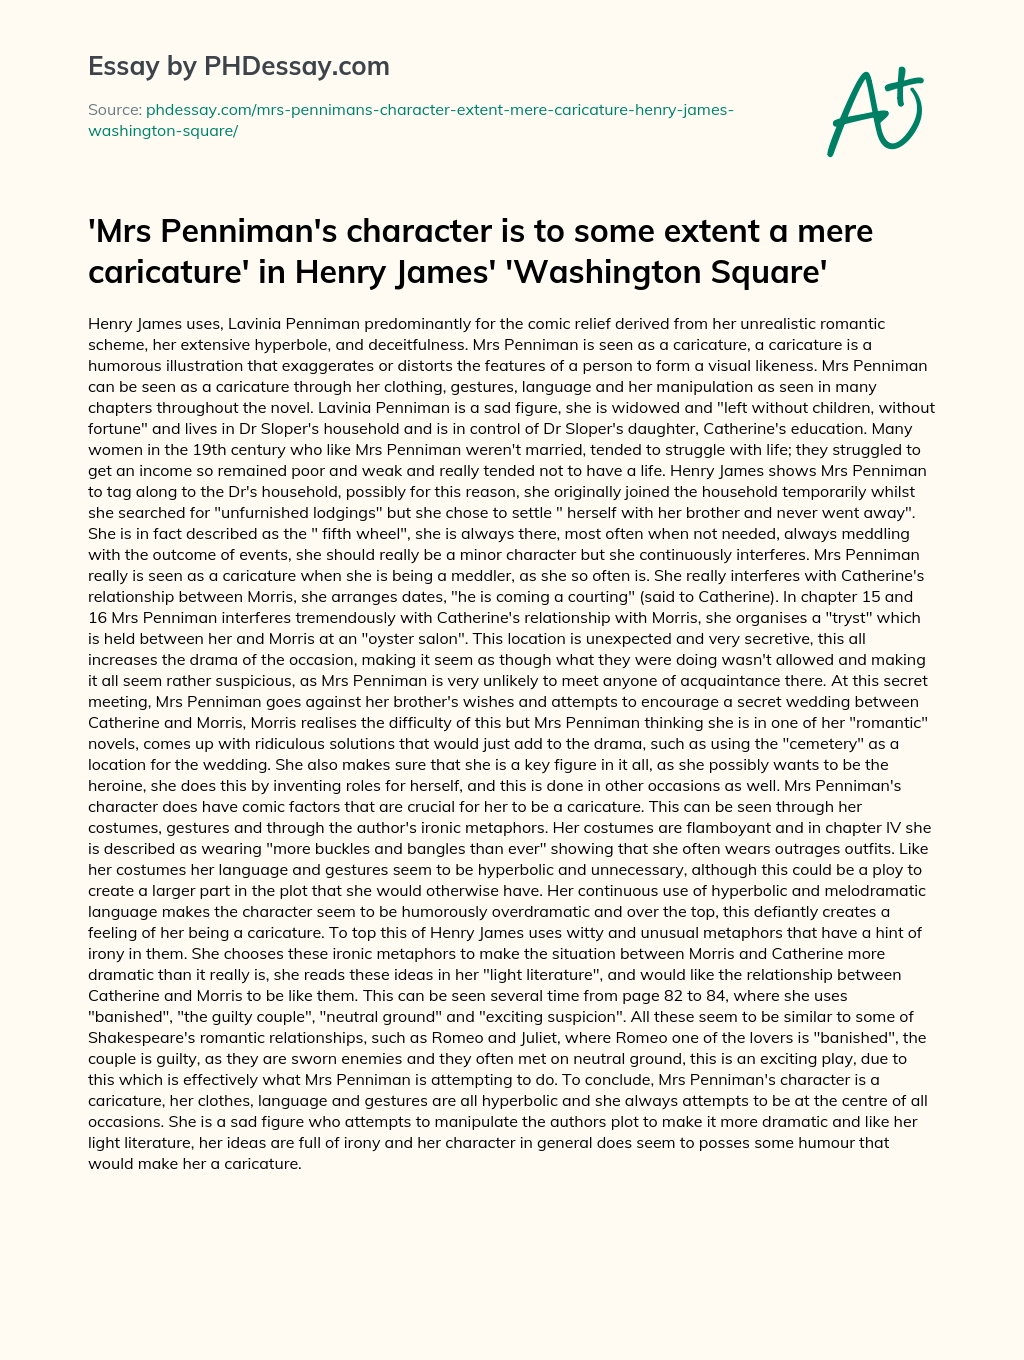 Mrs Pennimans character is to some extent a mere caricature in Henry James Washington Square essay